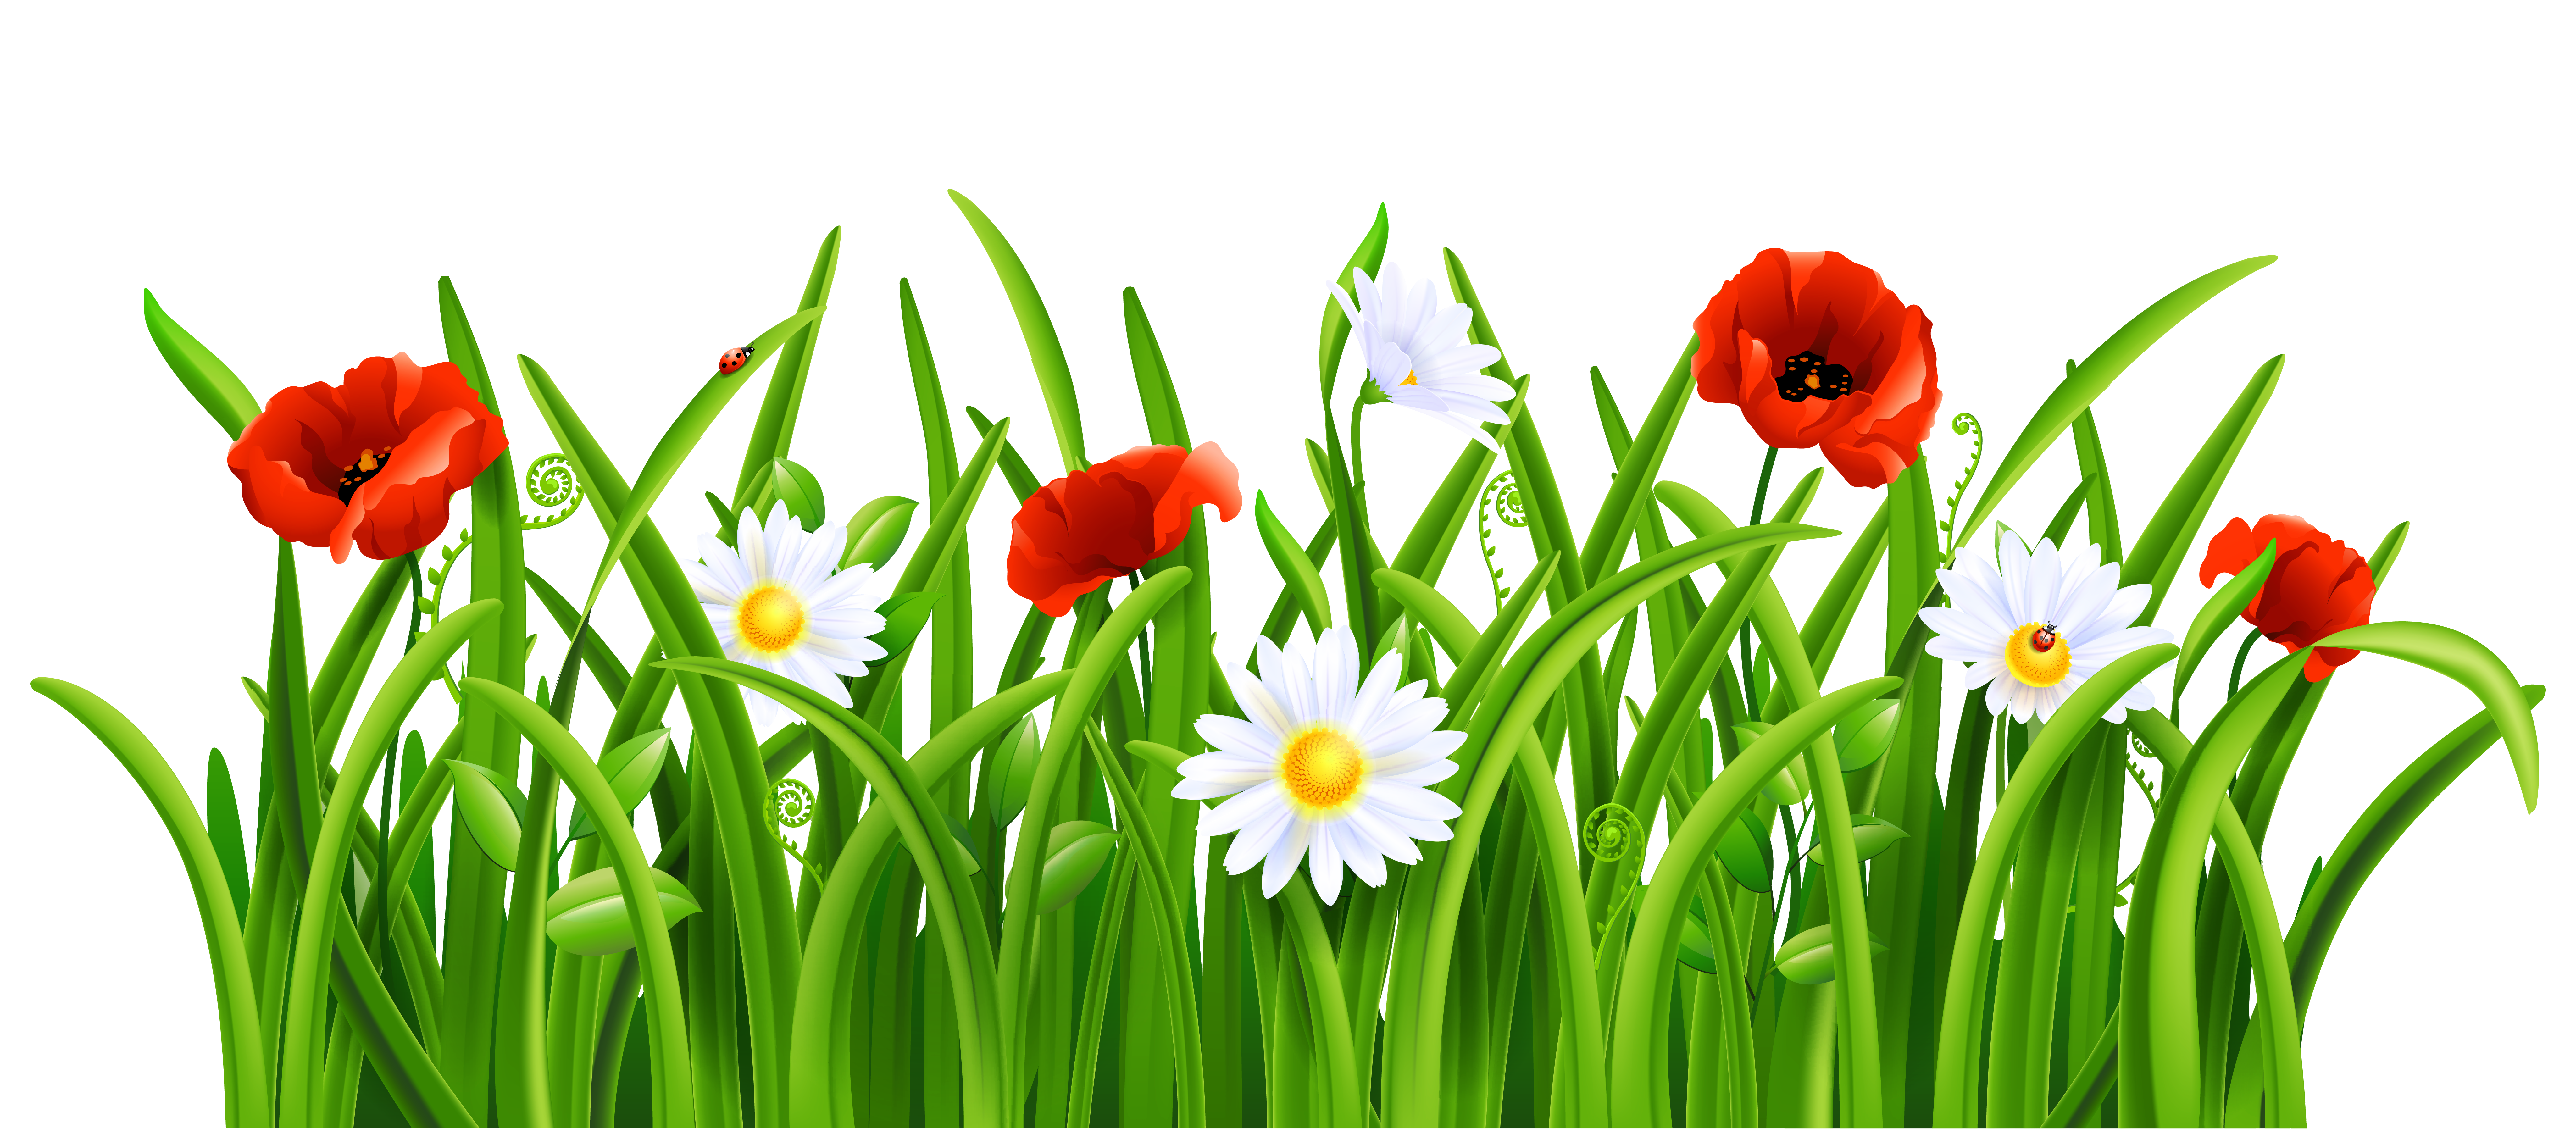 Grass with flower clipart png